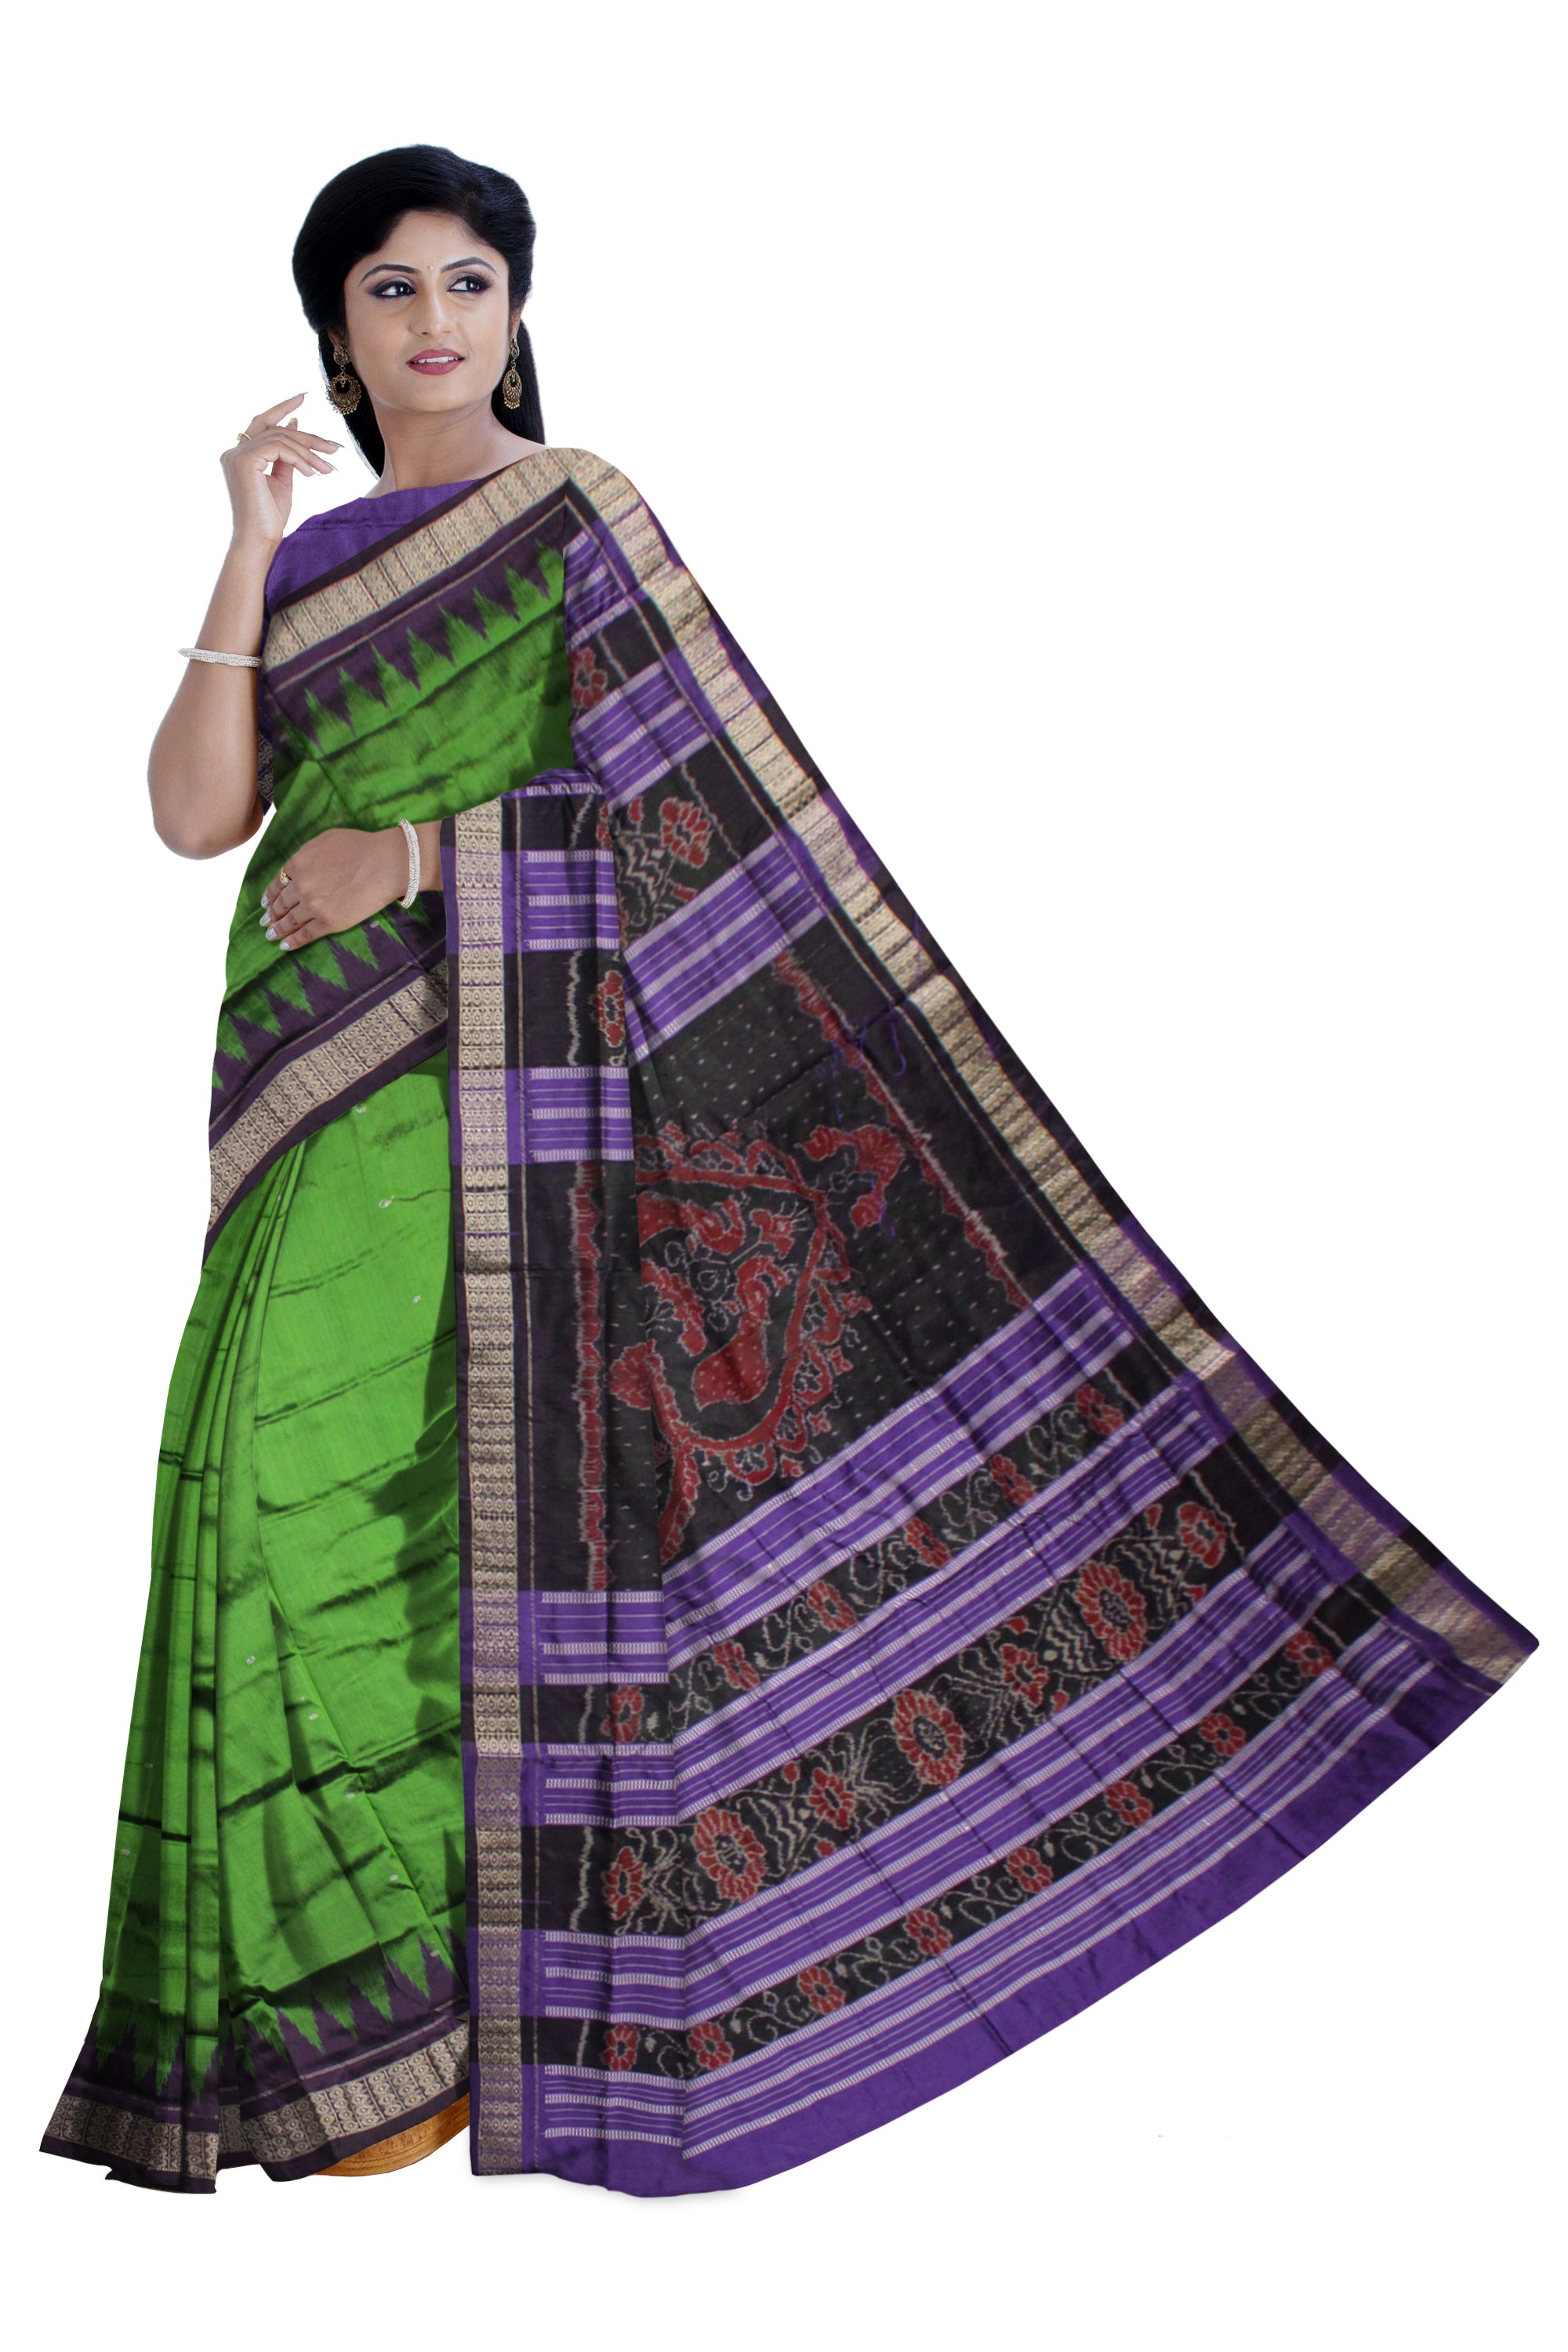 SMALL BOOTY PATTERN PLAIN PATA SAREE IS GREEN AND PURPLE COLOR BASE.WITH MATCHING BLOUSE PIECE. - Koshali Arts & Crafts Enterprise